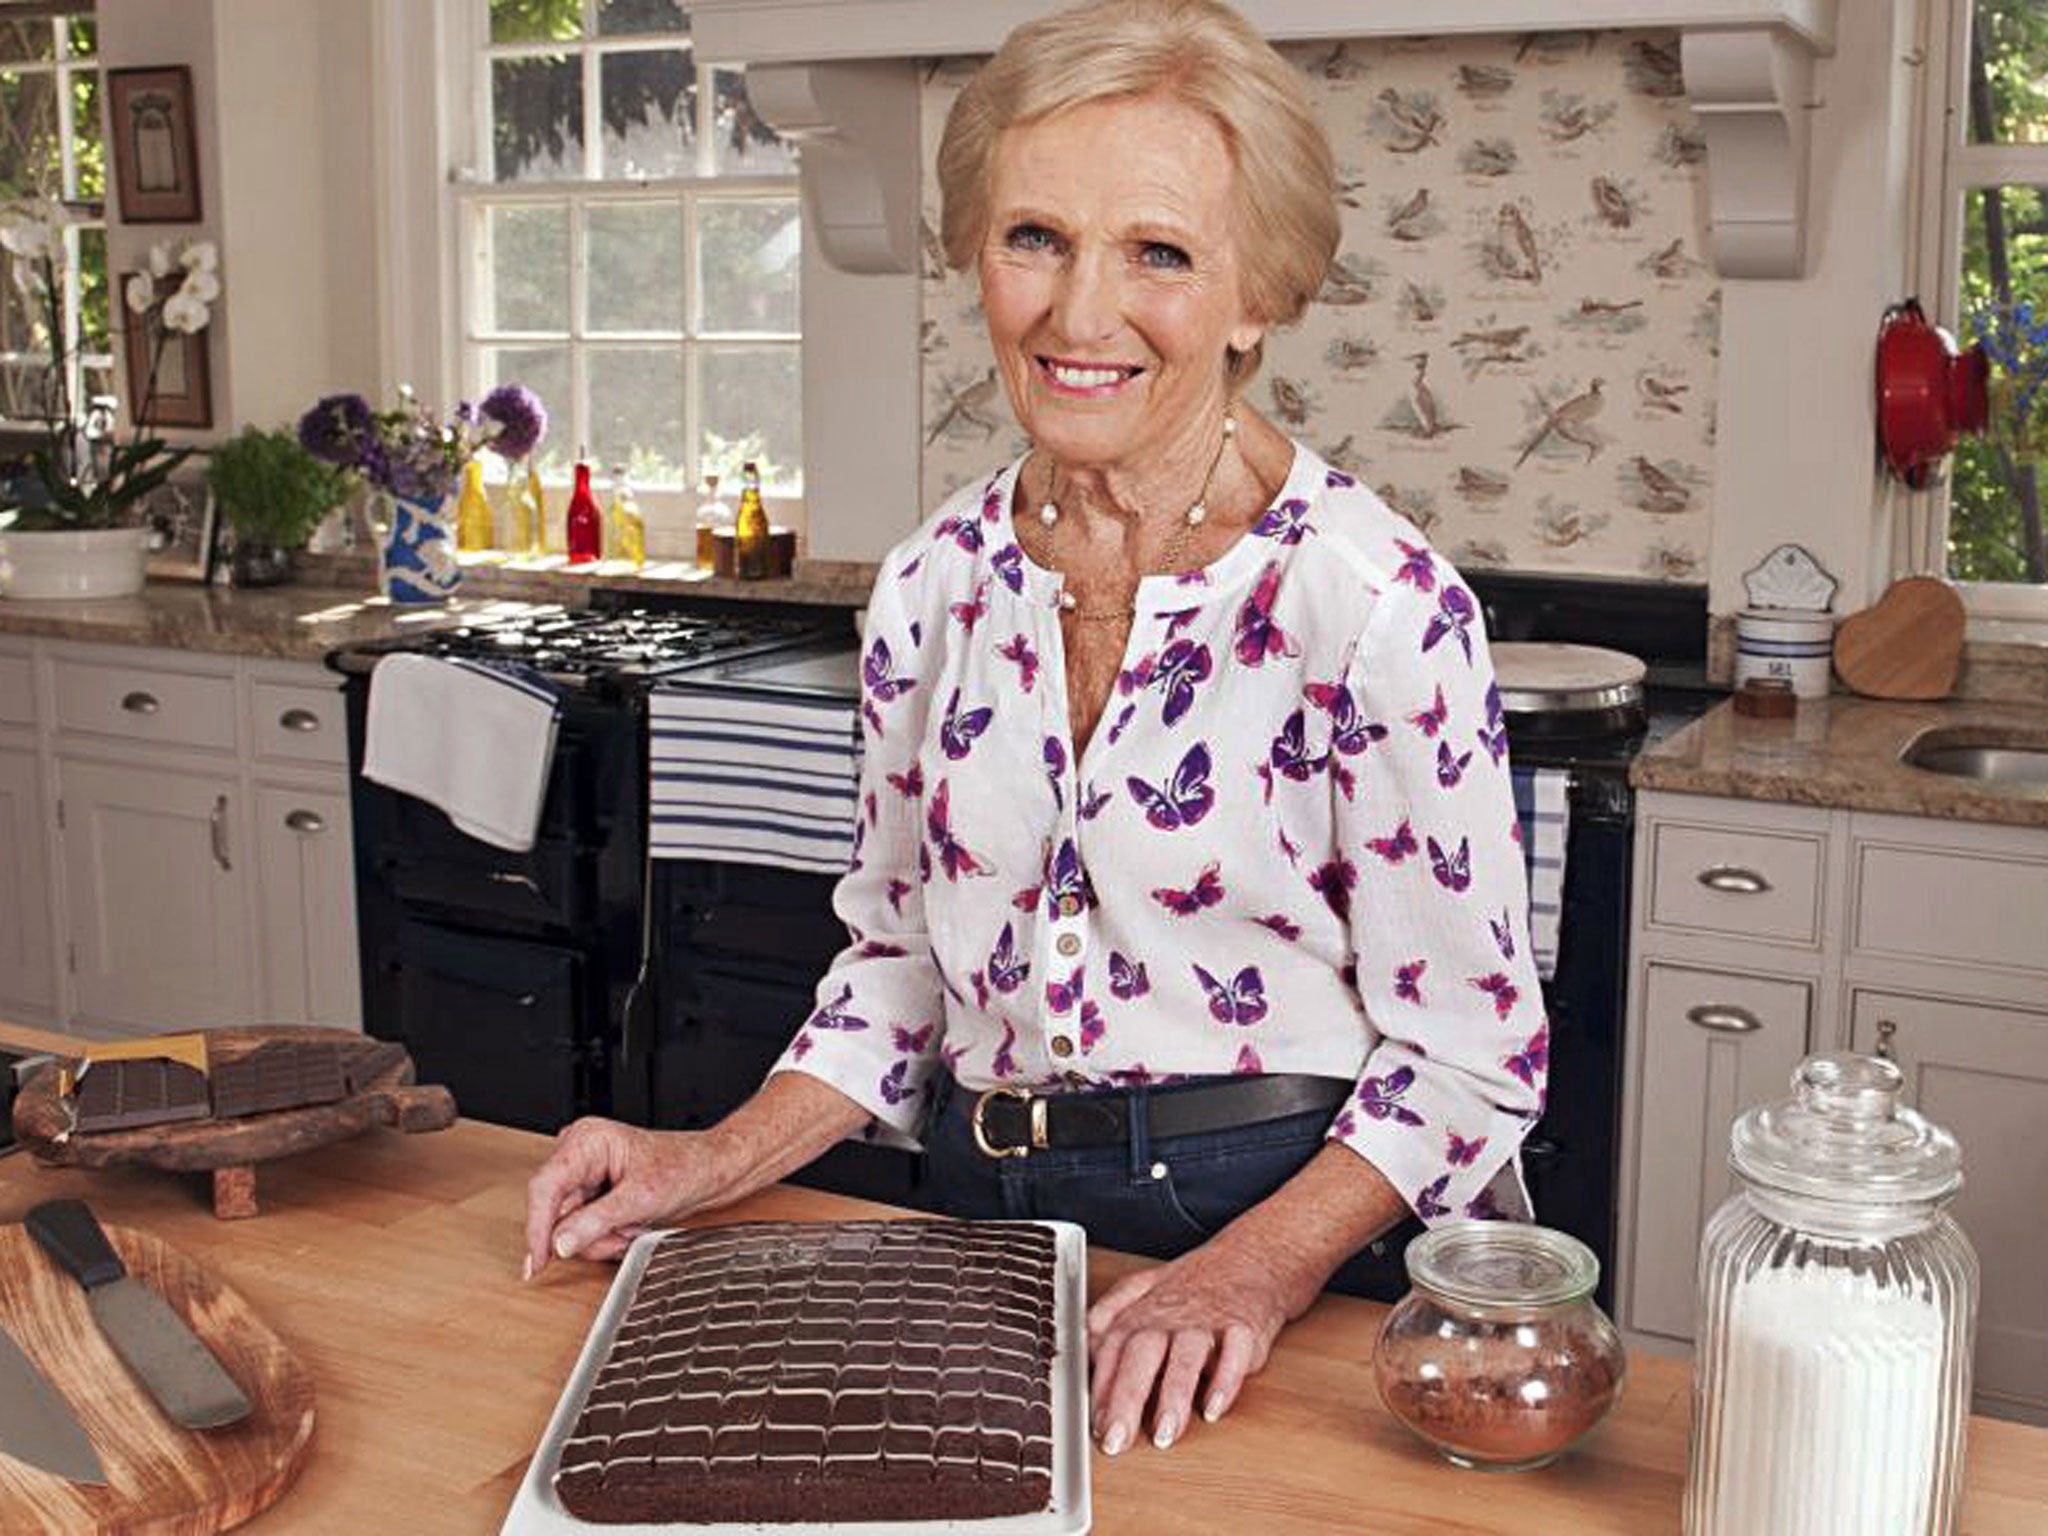 A piece of cake: 'Mary Berry Cooks'